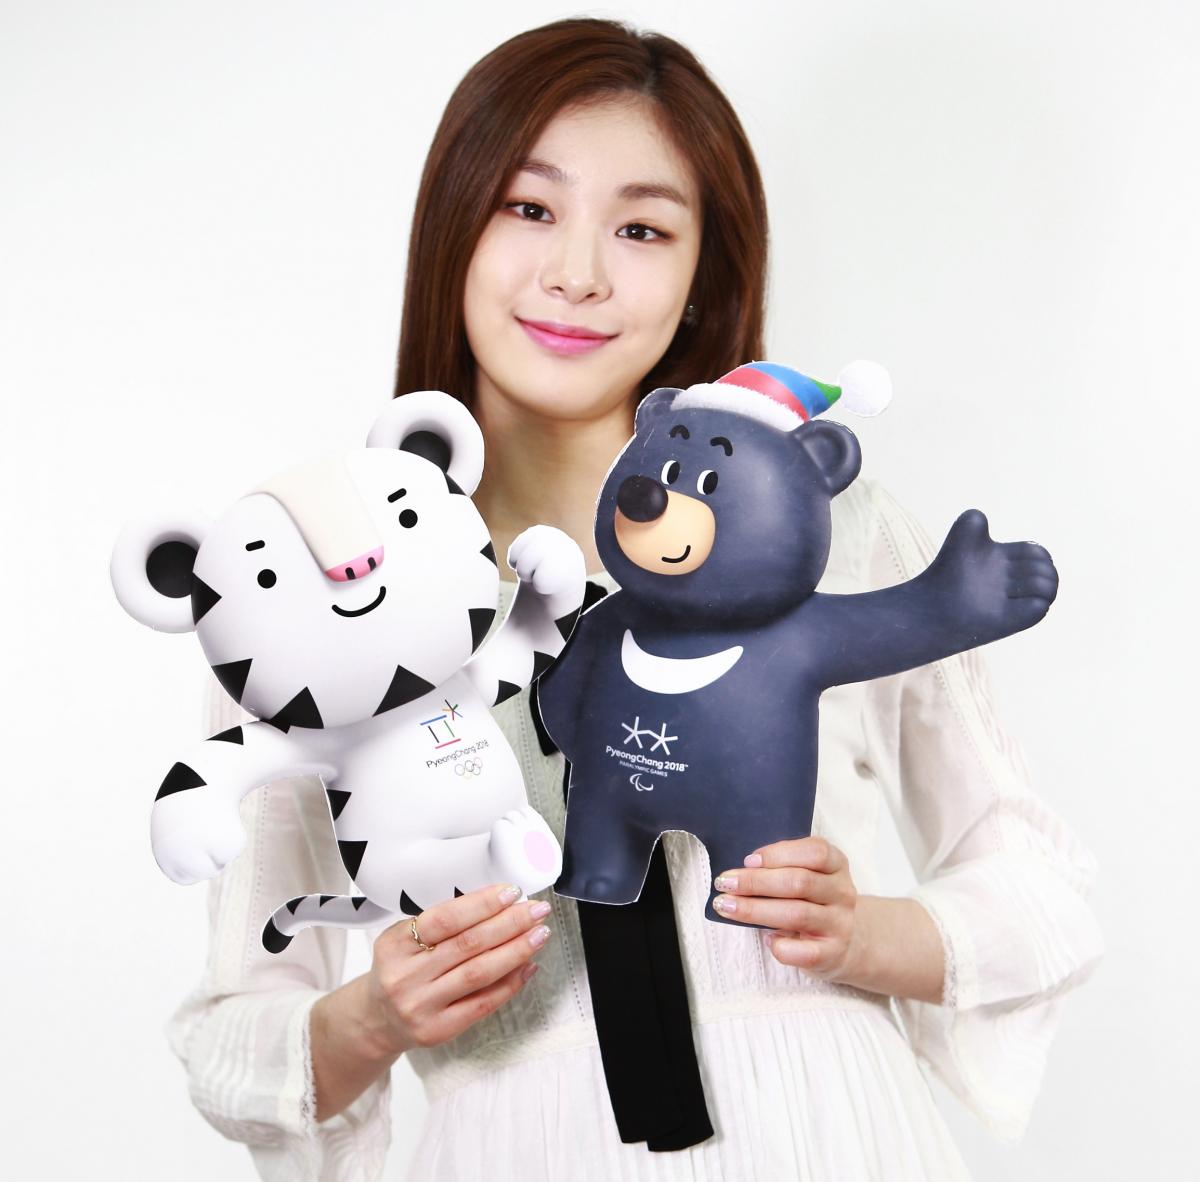 Asiatic woman holding two images of tiger and bear mascot